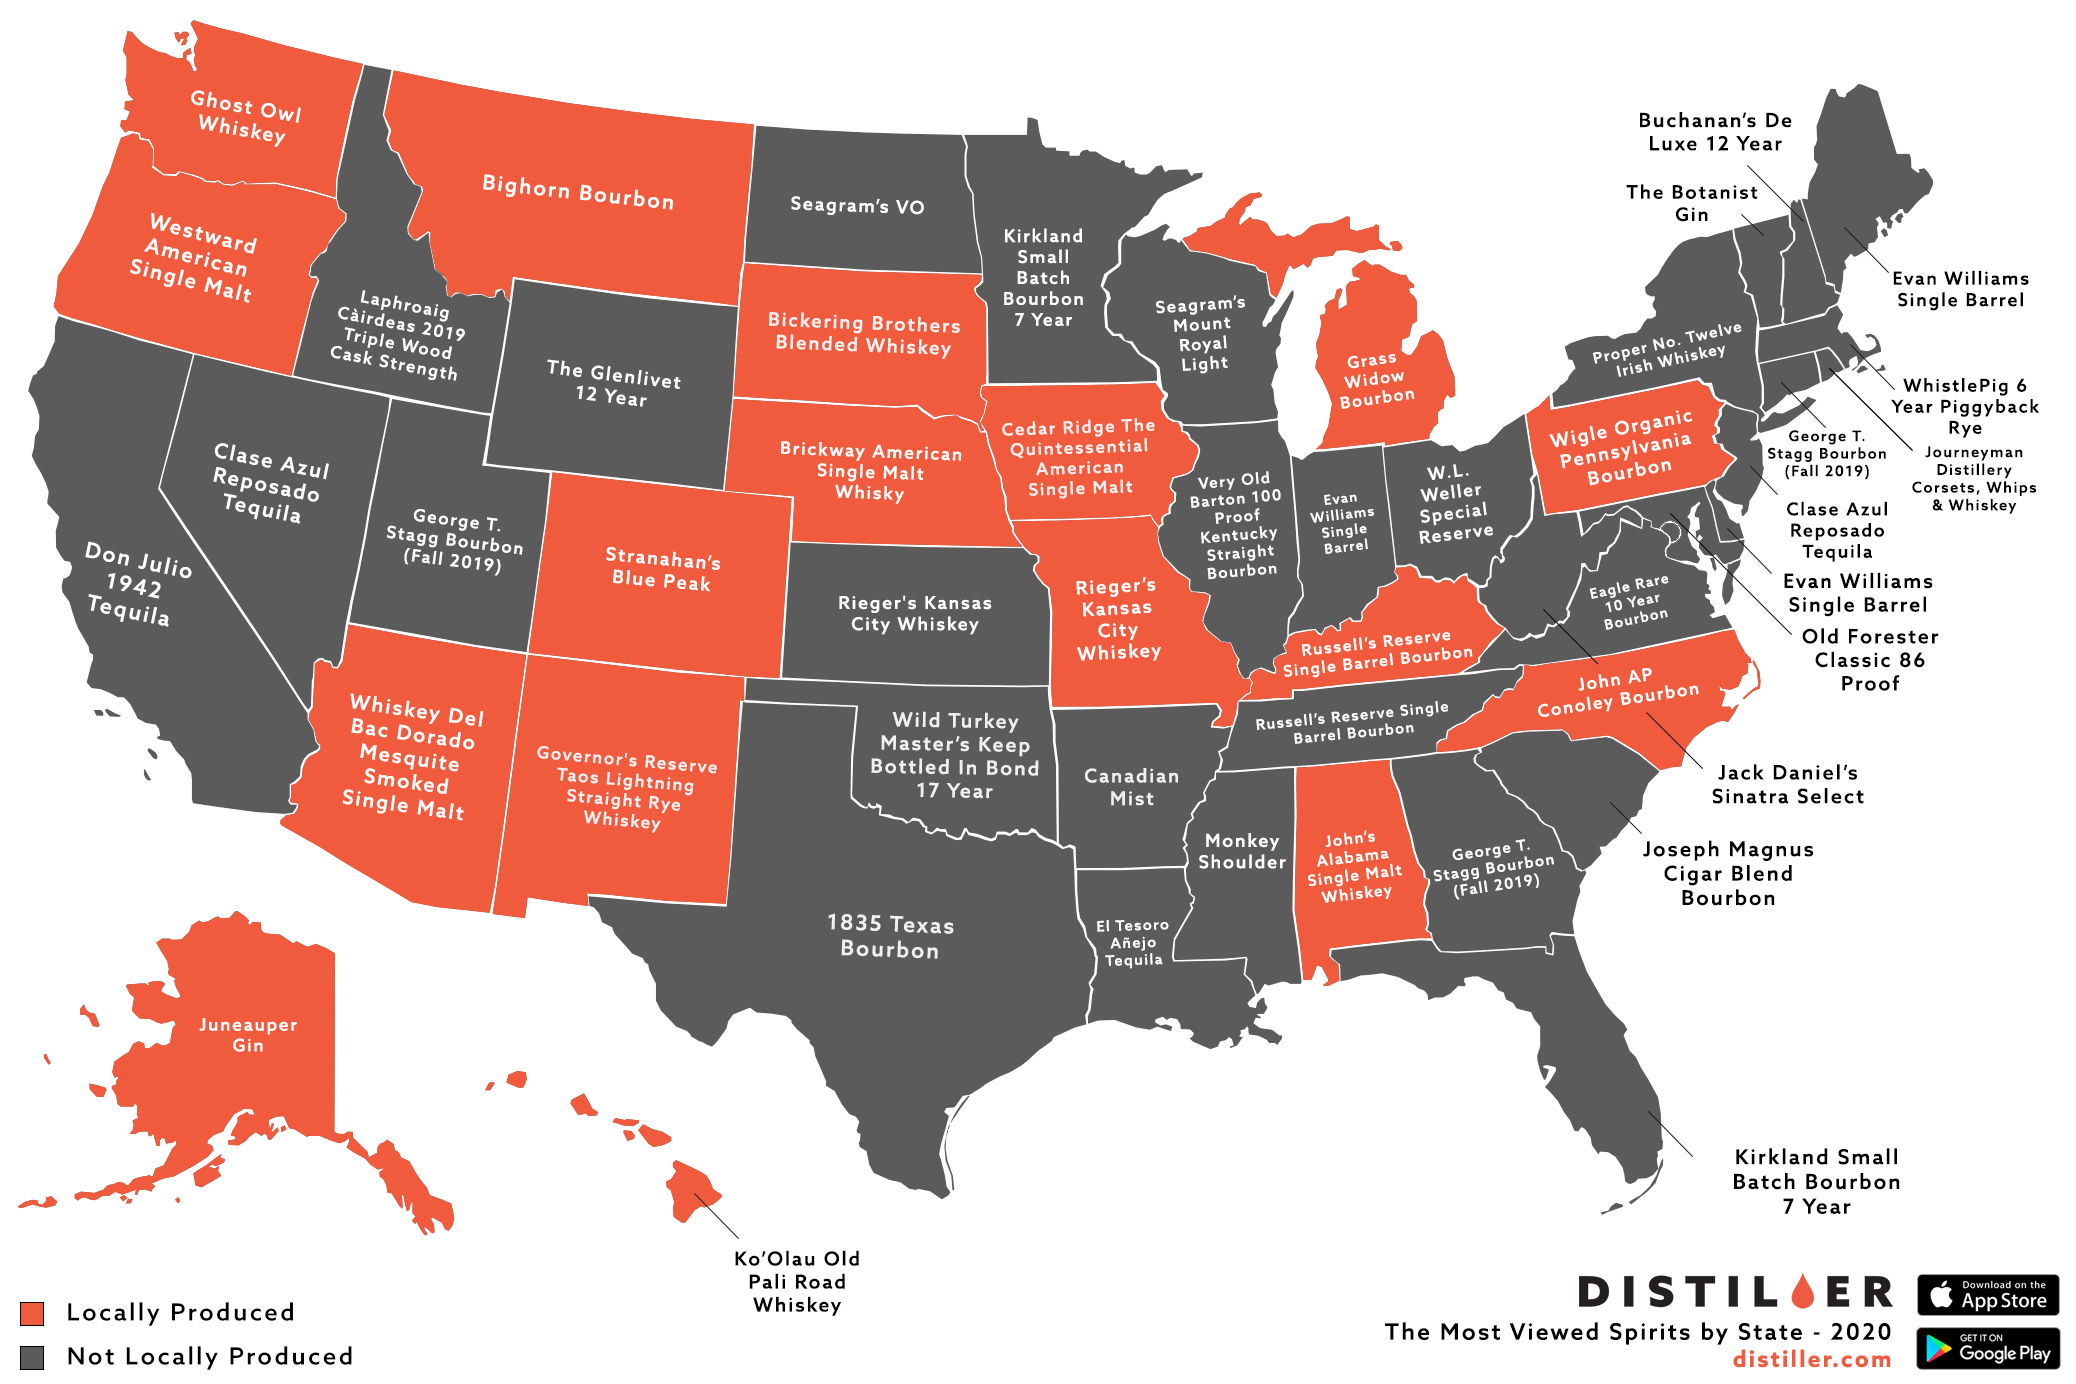 Distiller in 2020: The Top Spirits By State